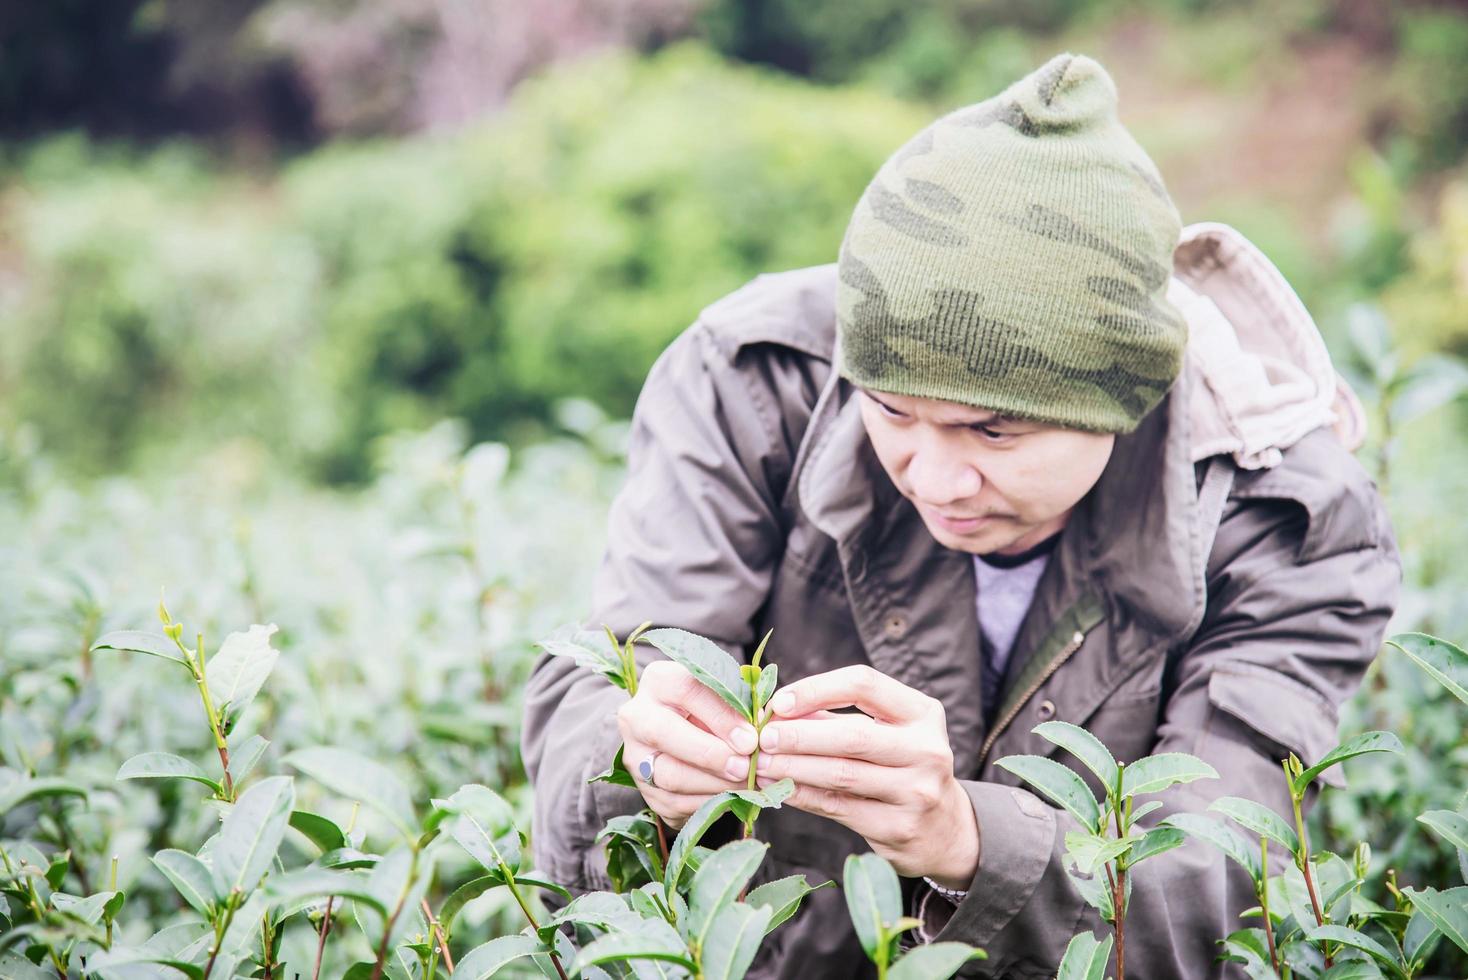 Man harvest pick fresh green tea leaves at high land tea field in Chiang Mai Thailand - local people with agriculture in high land nature concept photo